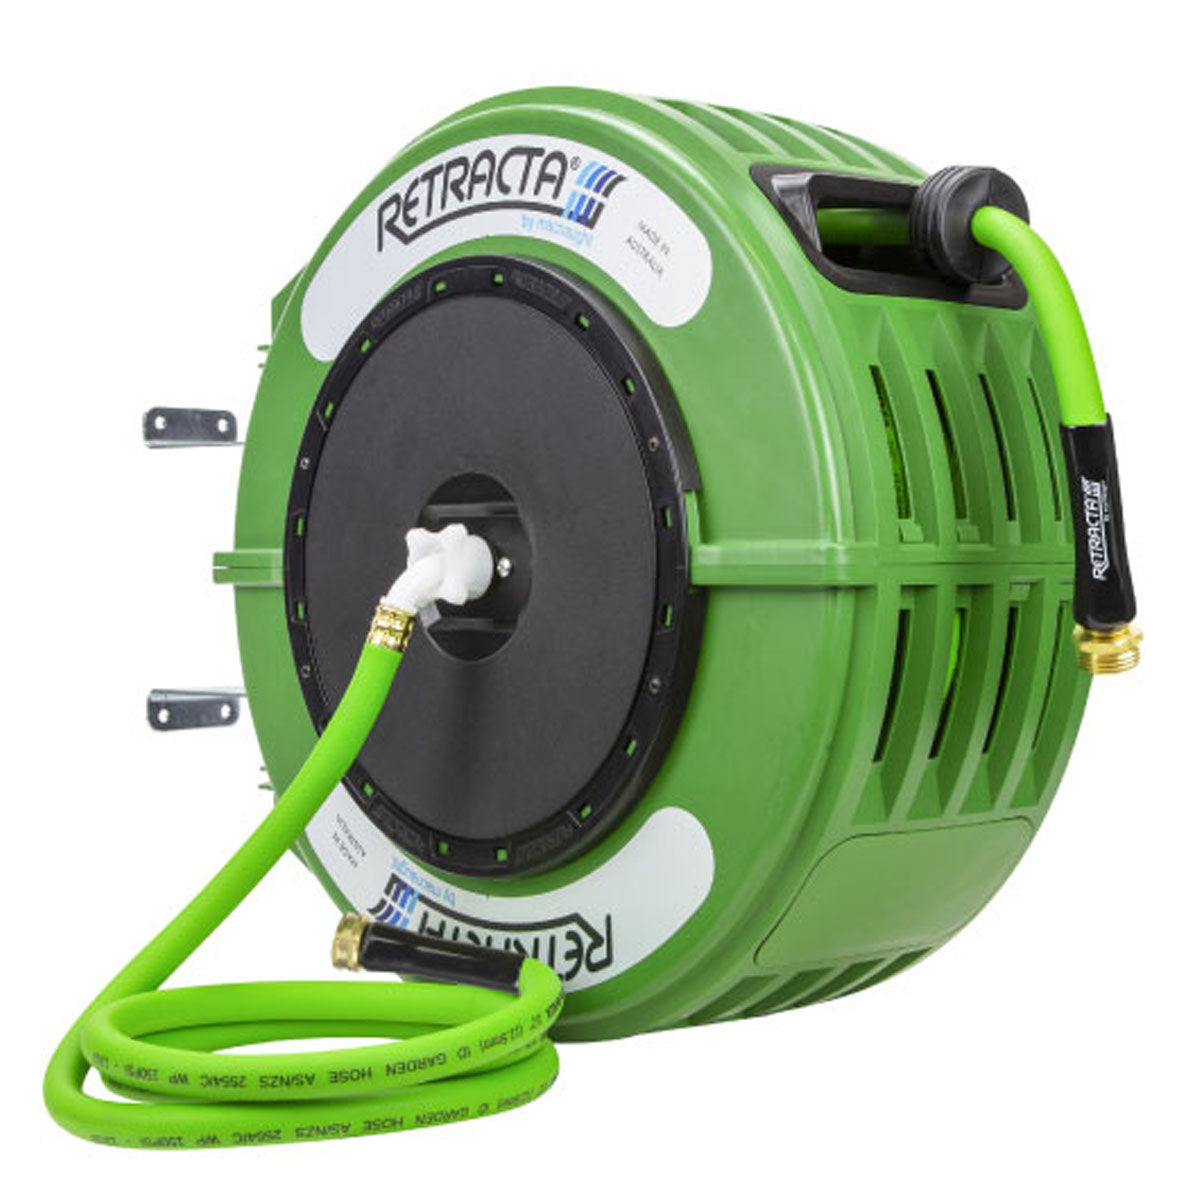 3/4' Automatic Retractable Winding Fuel Hose Reel - China Hoses